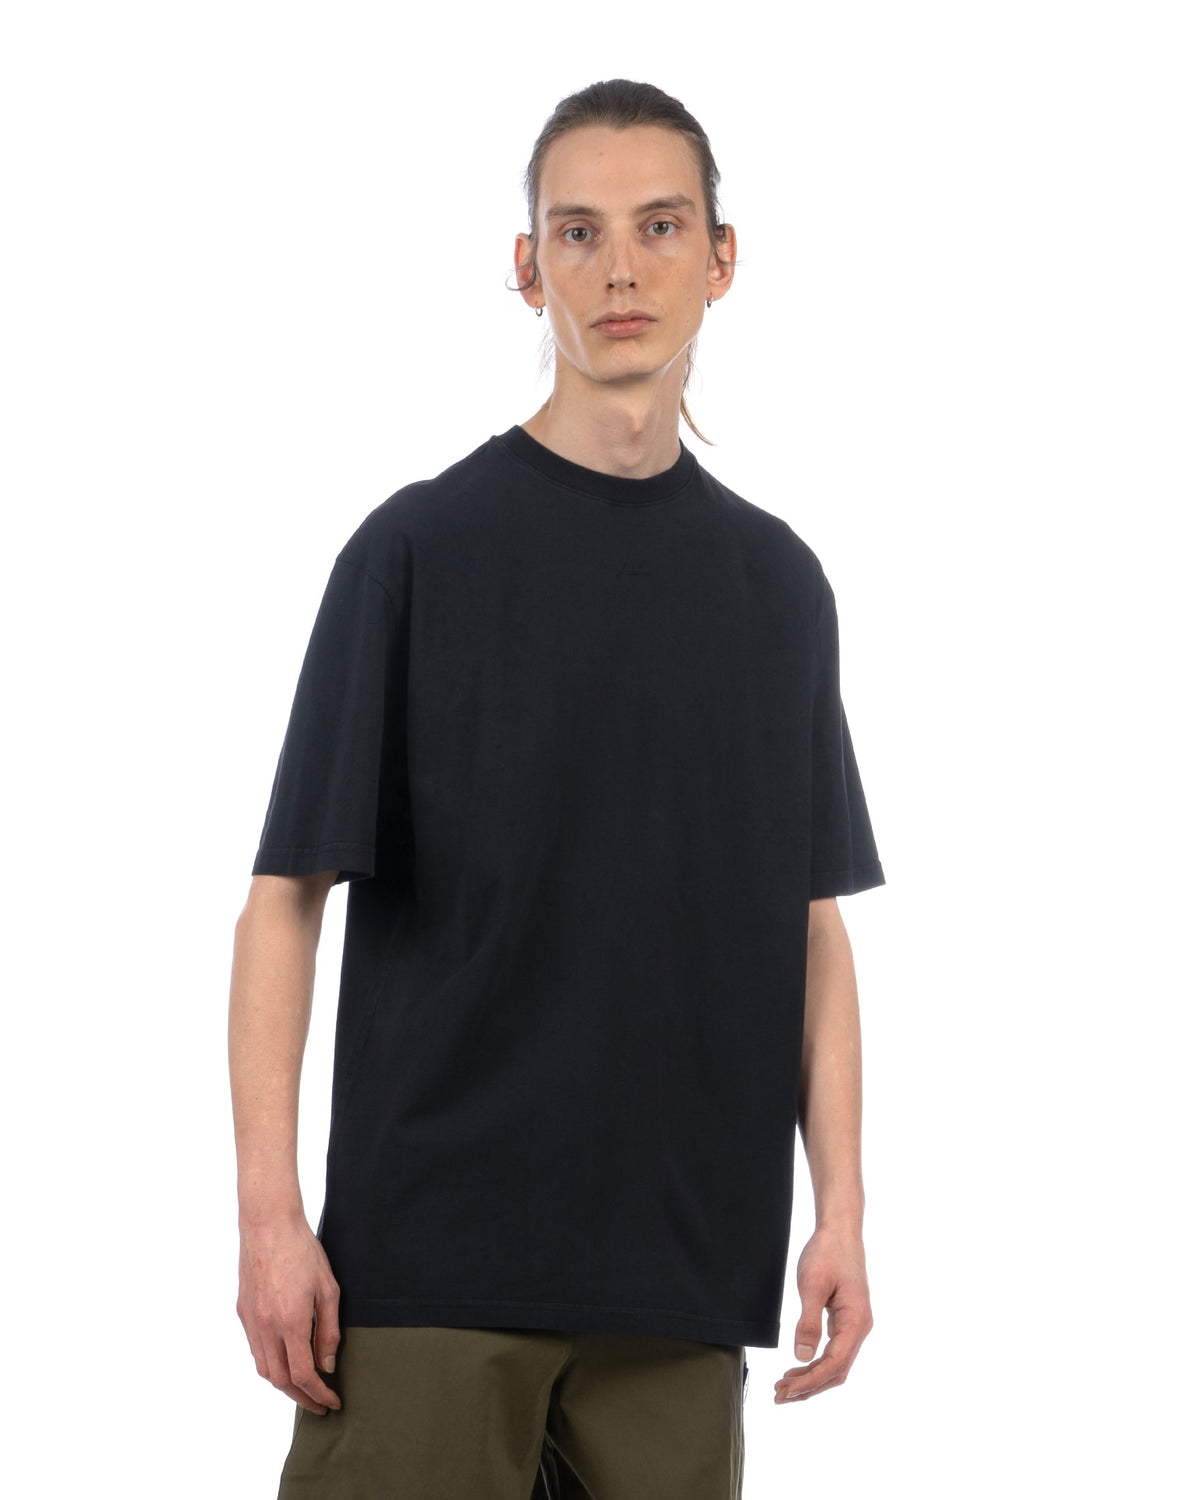 A-COLD-WALL* | Essential T-Shirt Onyx - Concrete